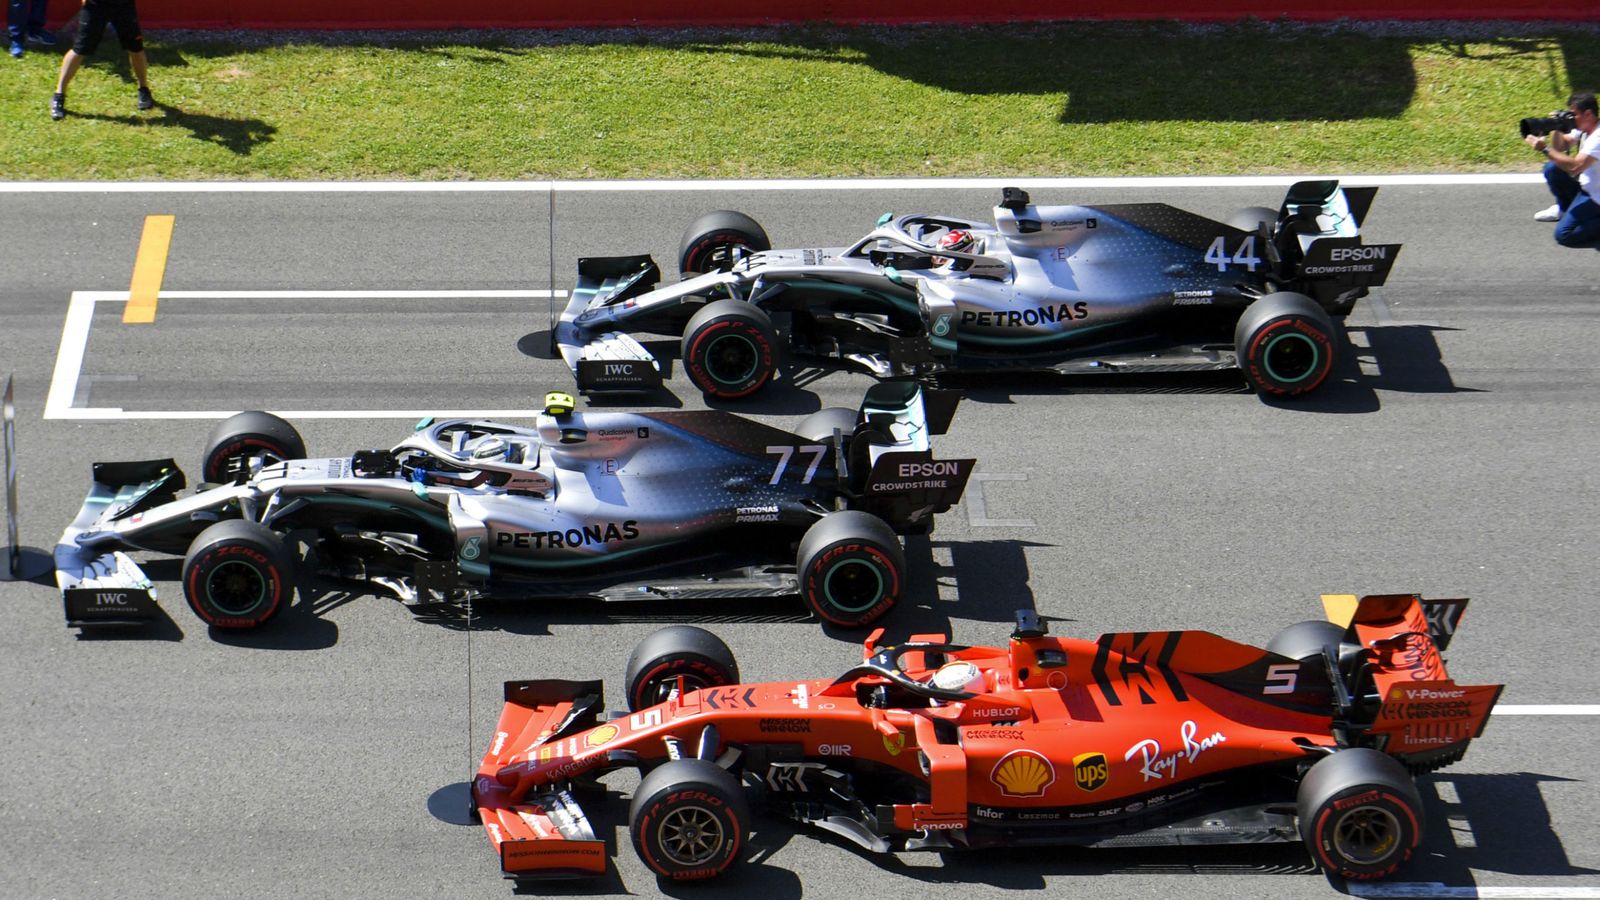 Martin Brundle on Spanish GP frustrations and F1 future visions